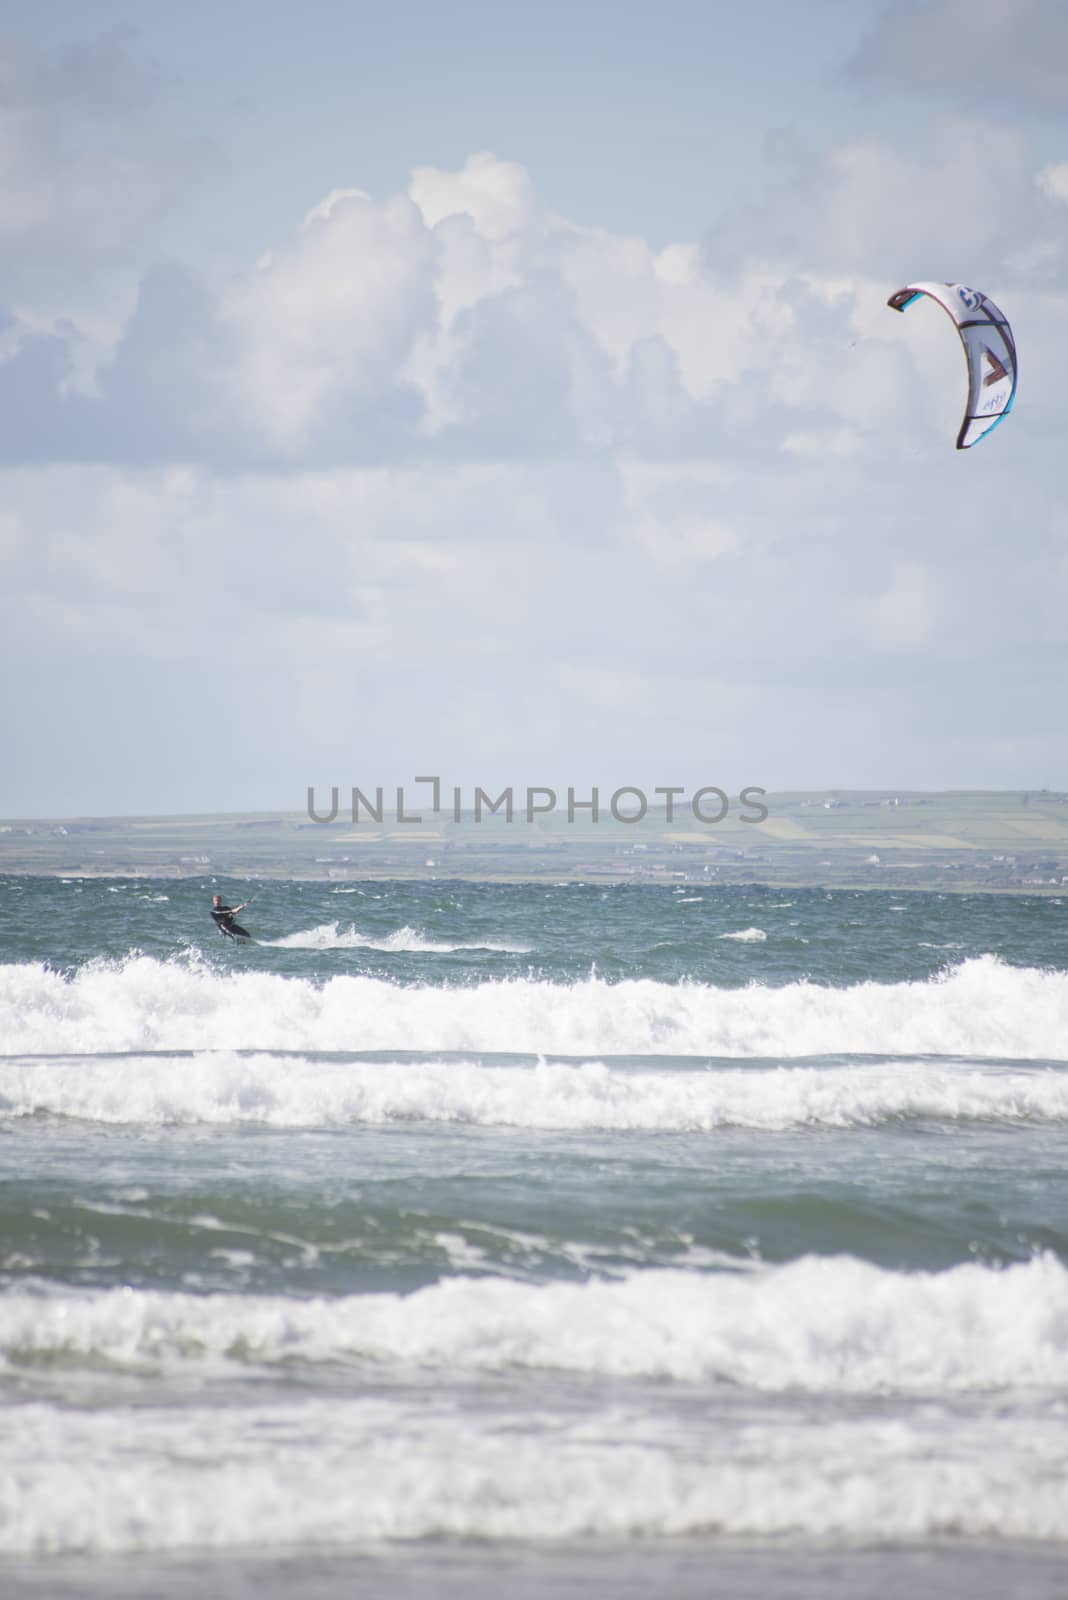 kite surfer on big waves by morrbyte